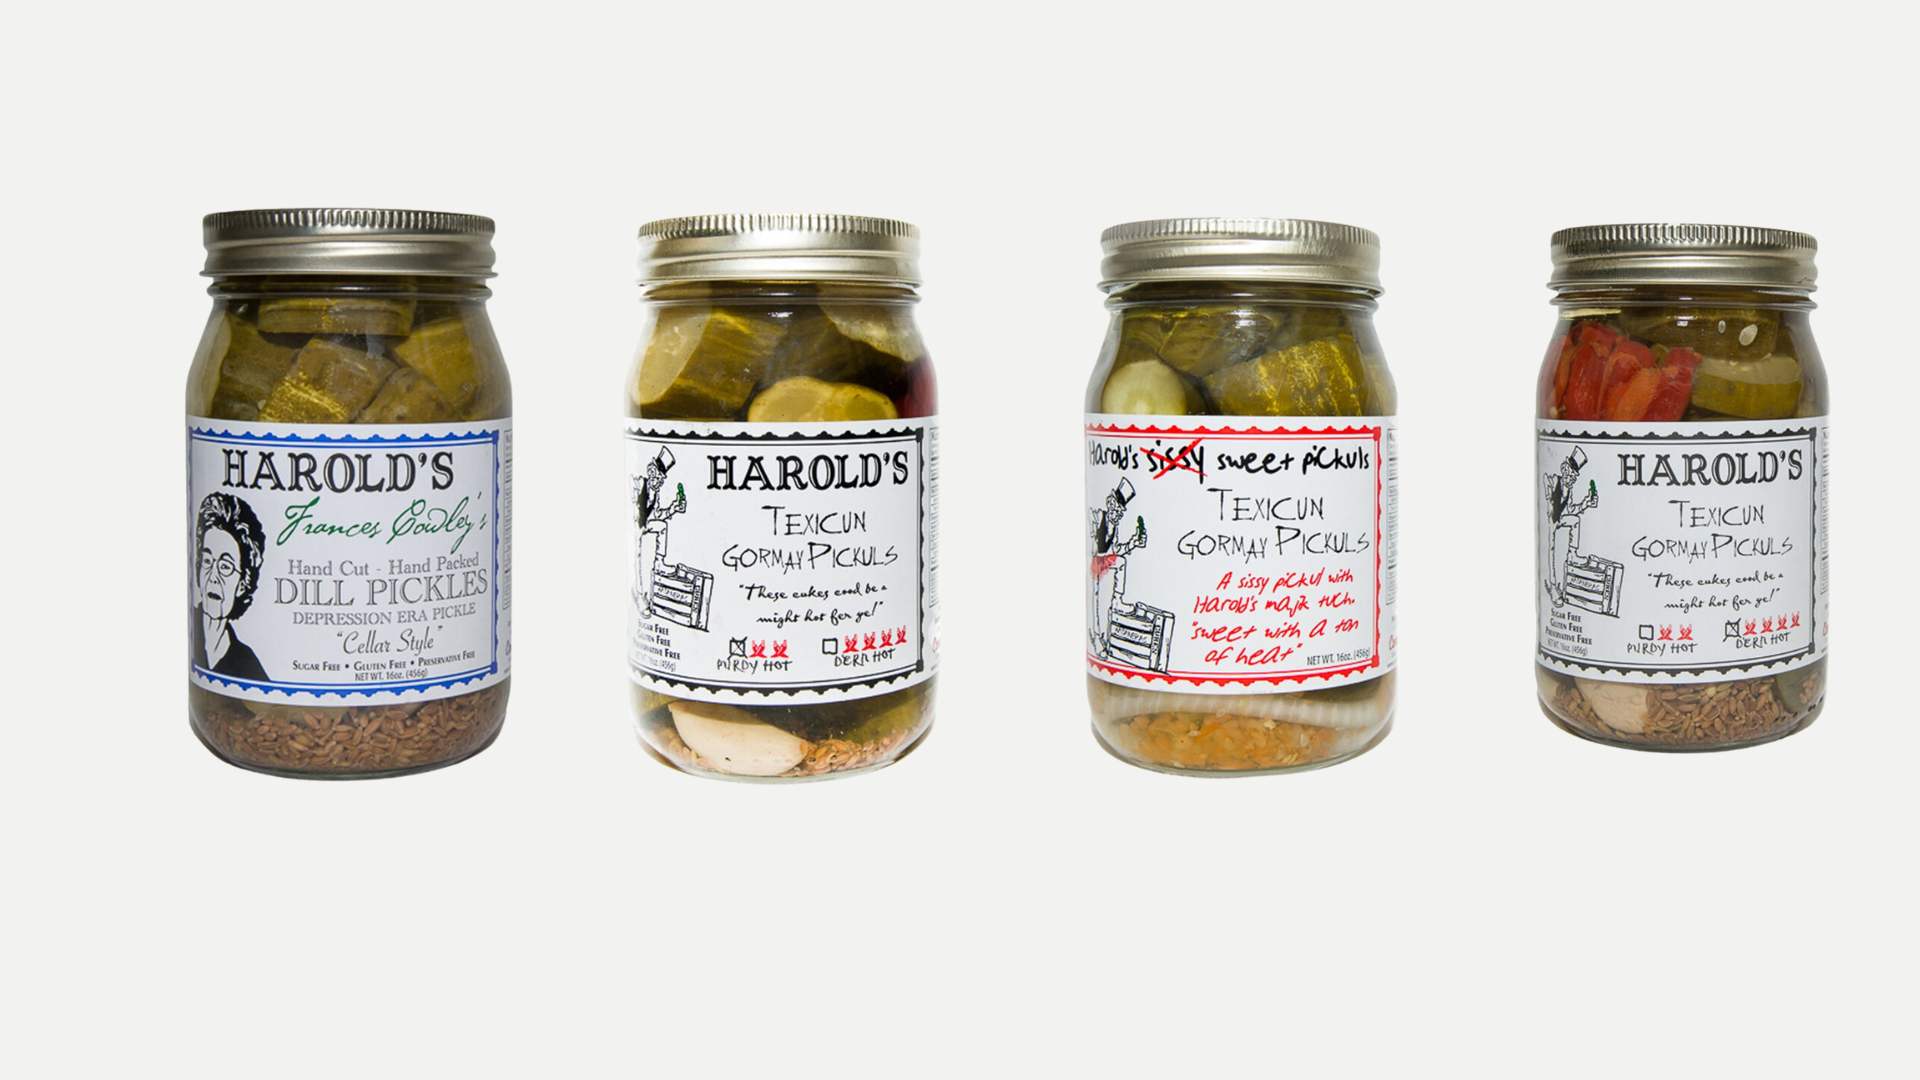 Ultimate Pickle Gift Pack – Conscious Choice Foods